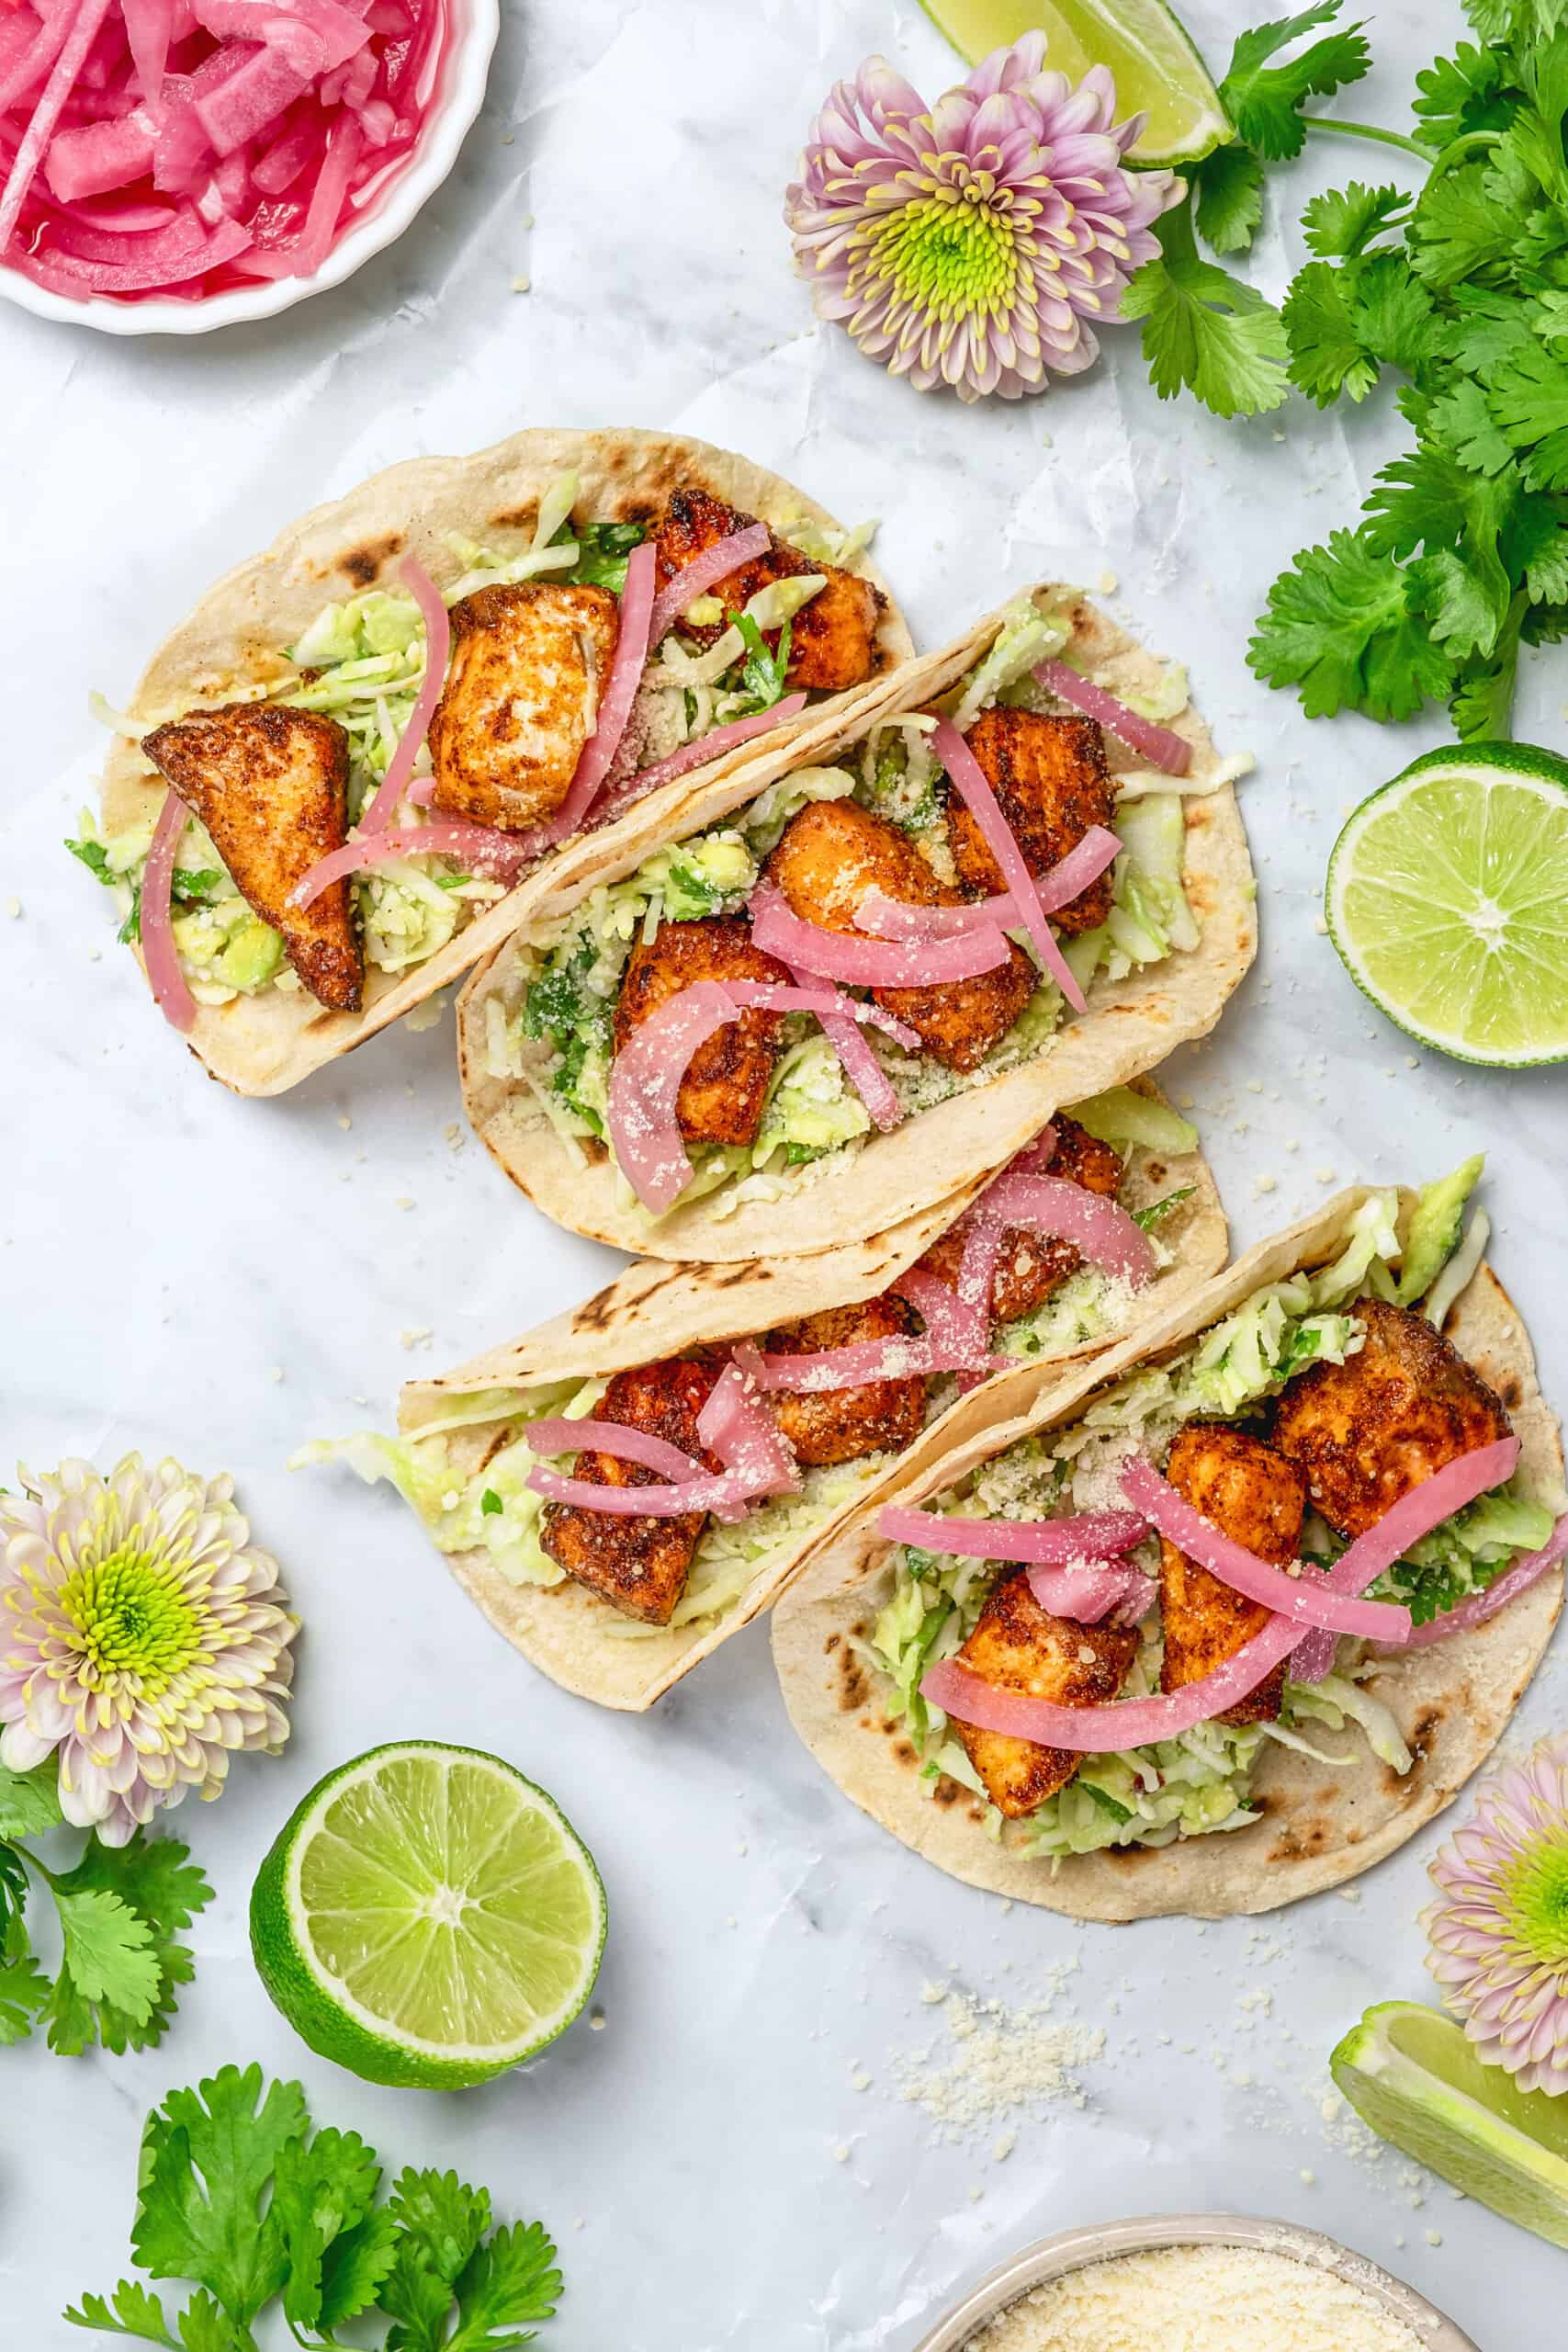 salmon tacos with creamy sauce and red onion garnish